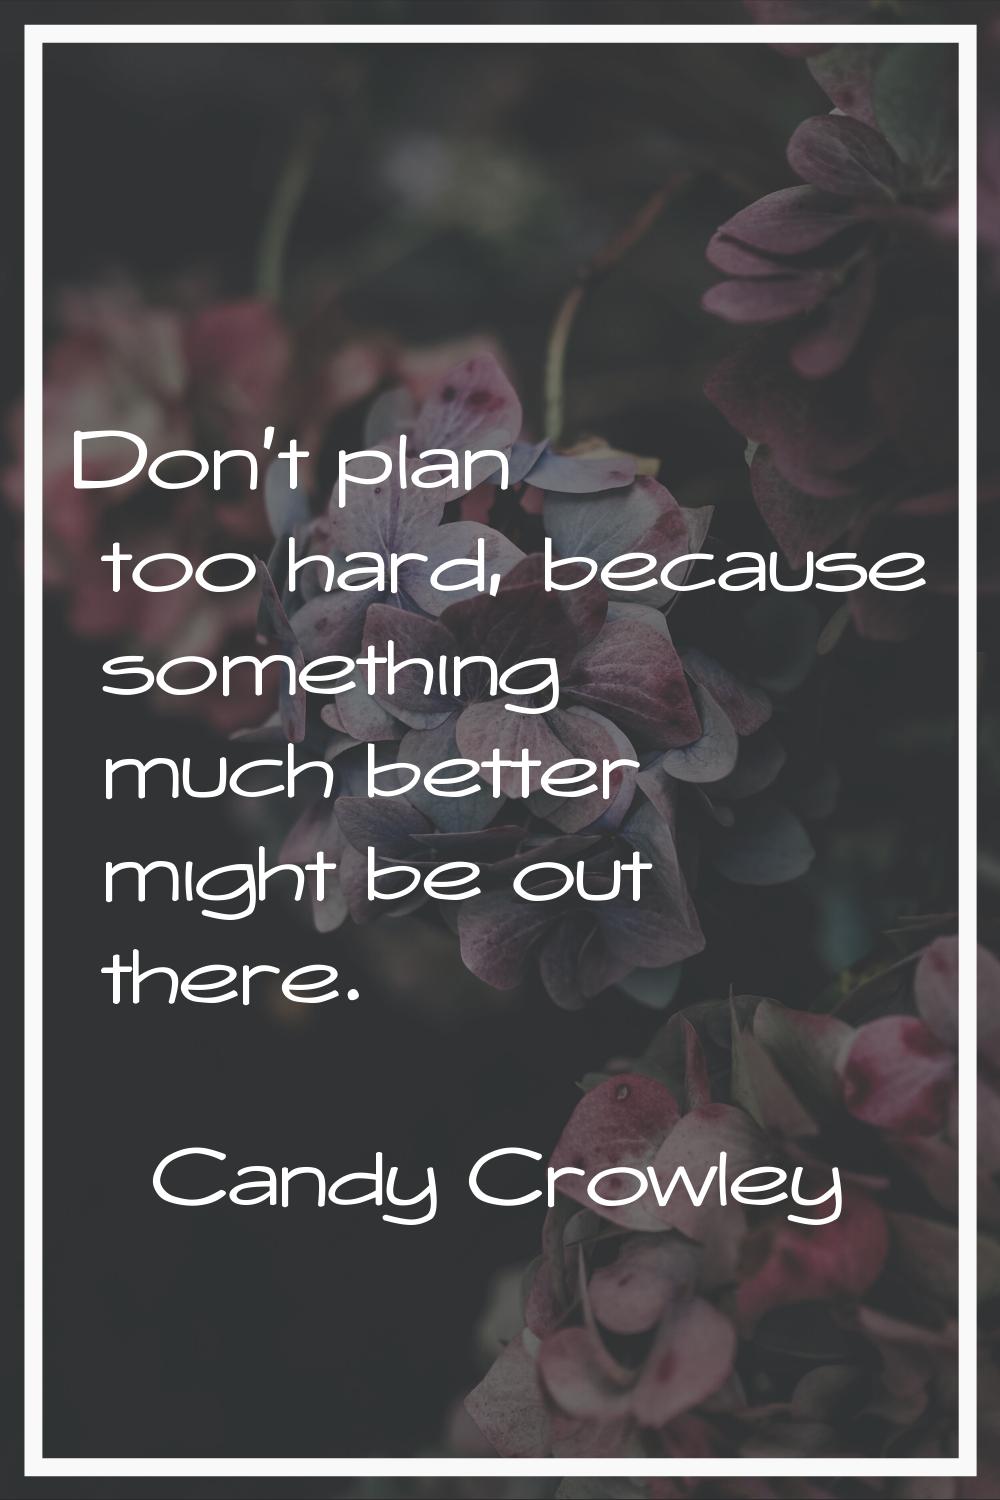 Don't plan too hard, because something much better might be out there.